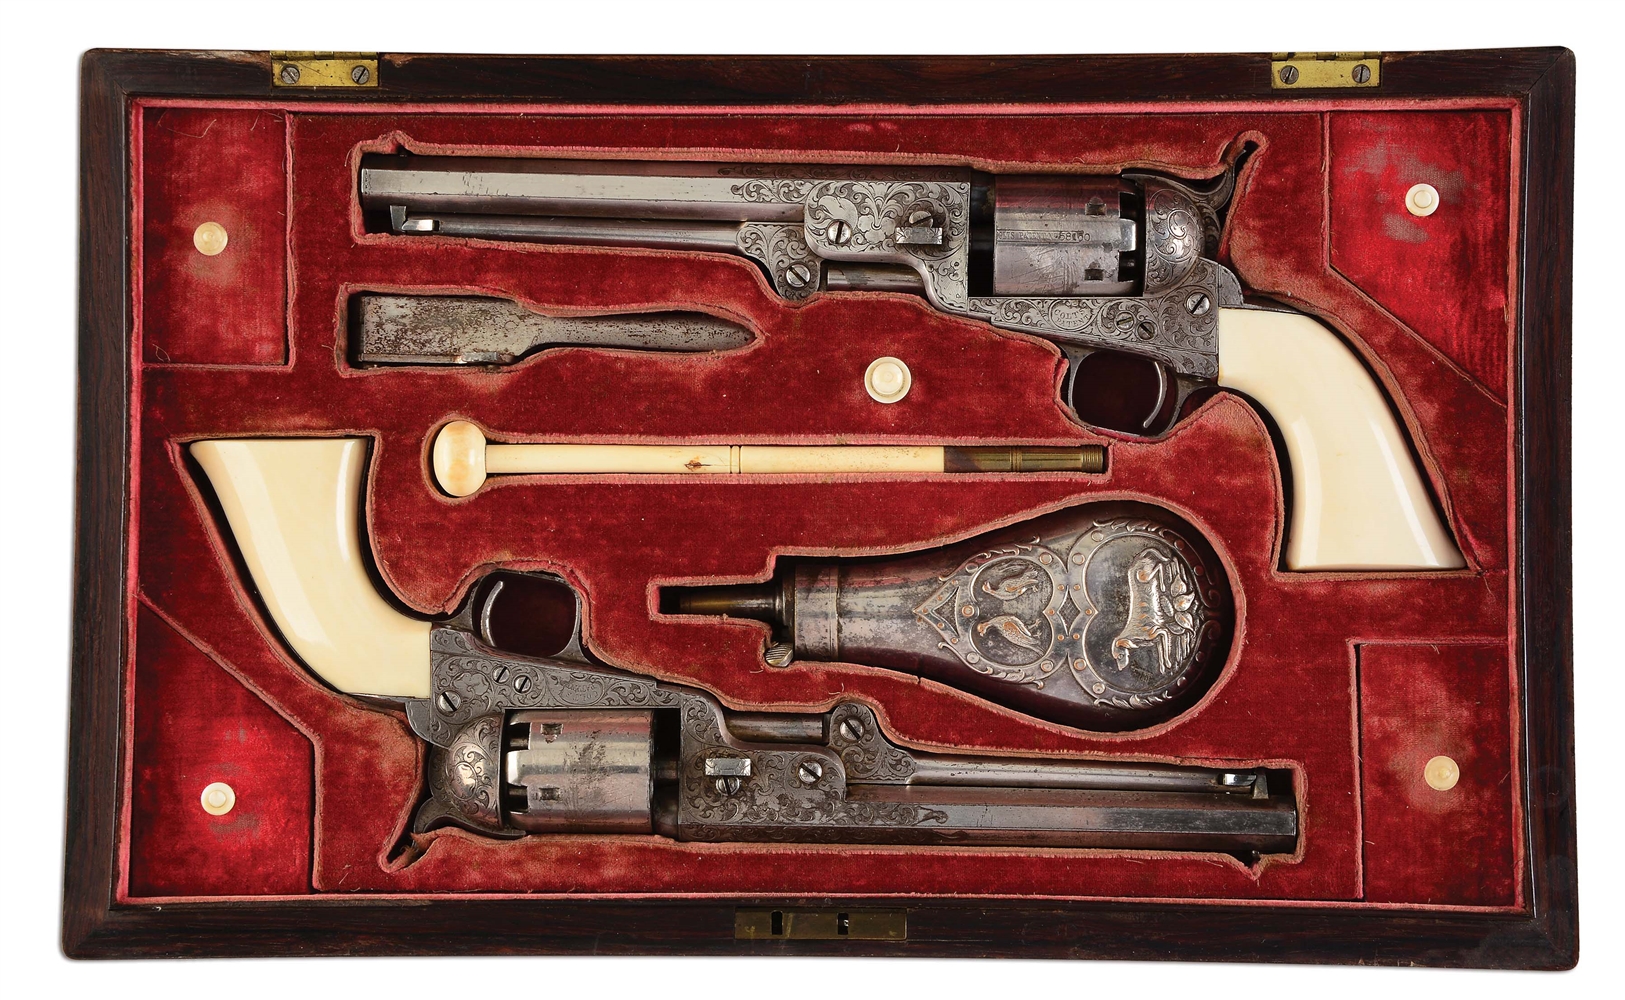 (A) FULL SILVER PLATED IVORY GRIP FACTORY ENGRAVED CASED PAIR OF COLT 1851 NAVY REVOLVERS BELONGING TO ROSENDO VELASCO.